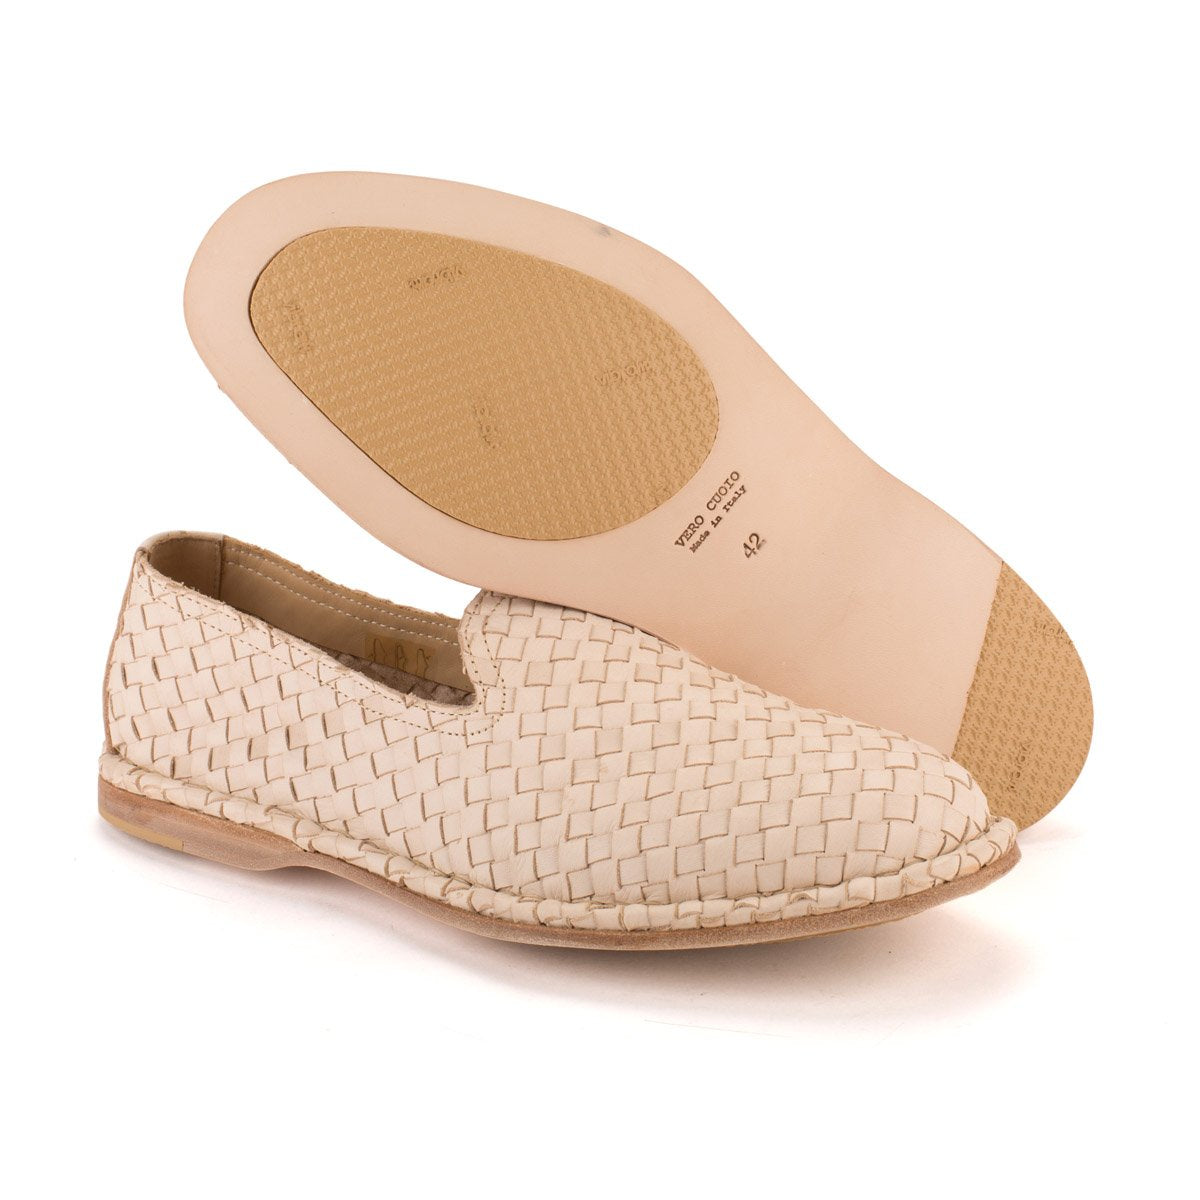 HAND 06 WOVEN SLIPPERS – Natural